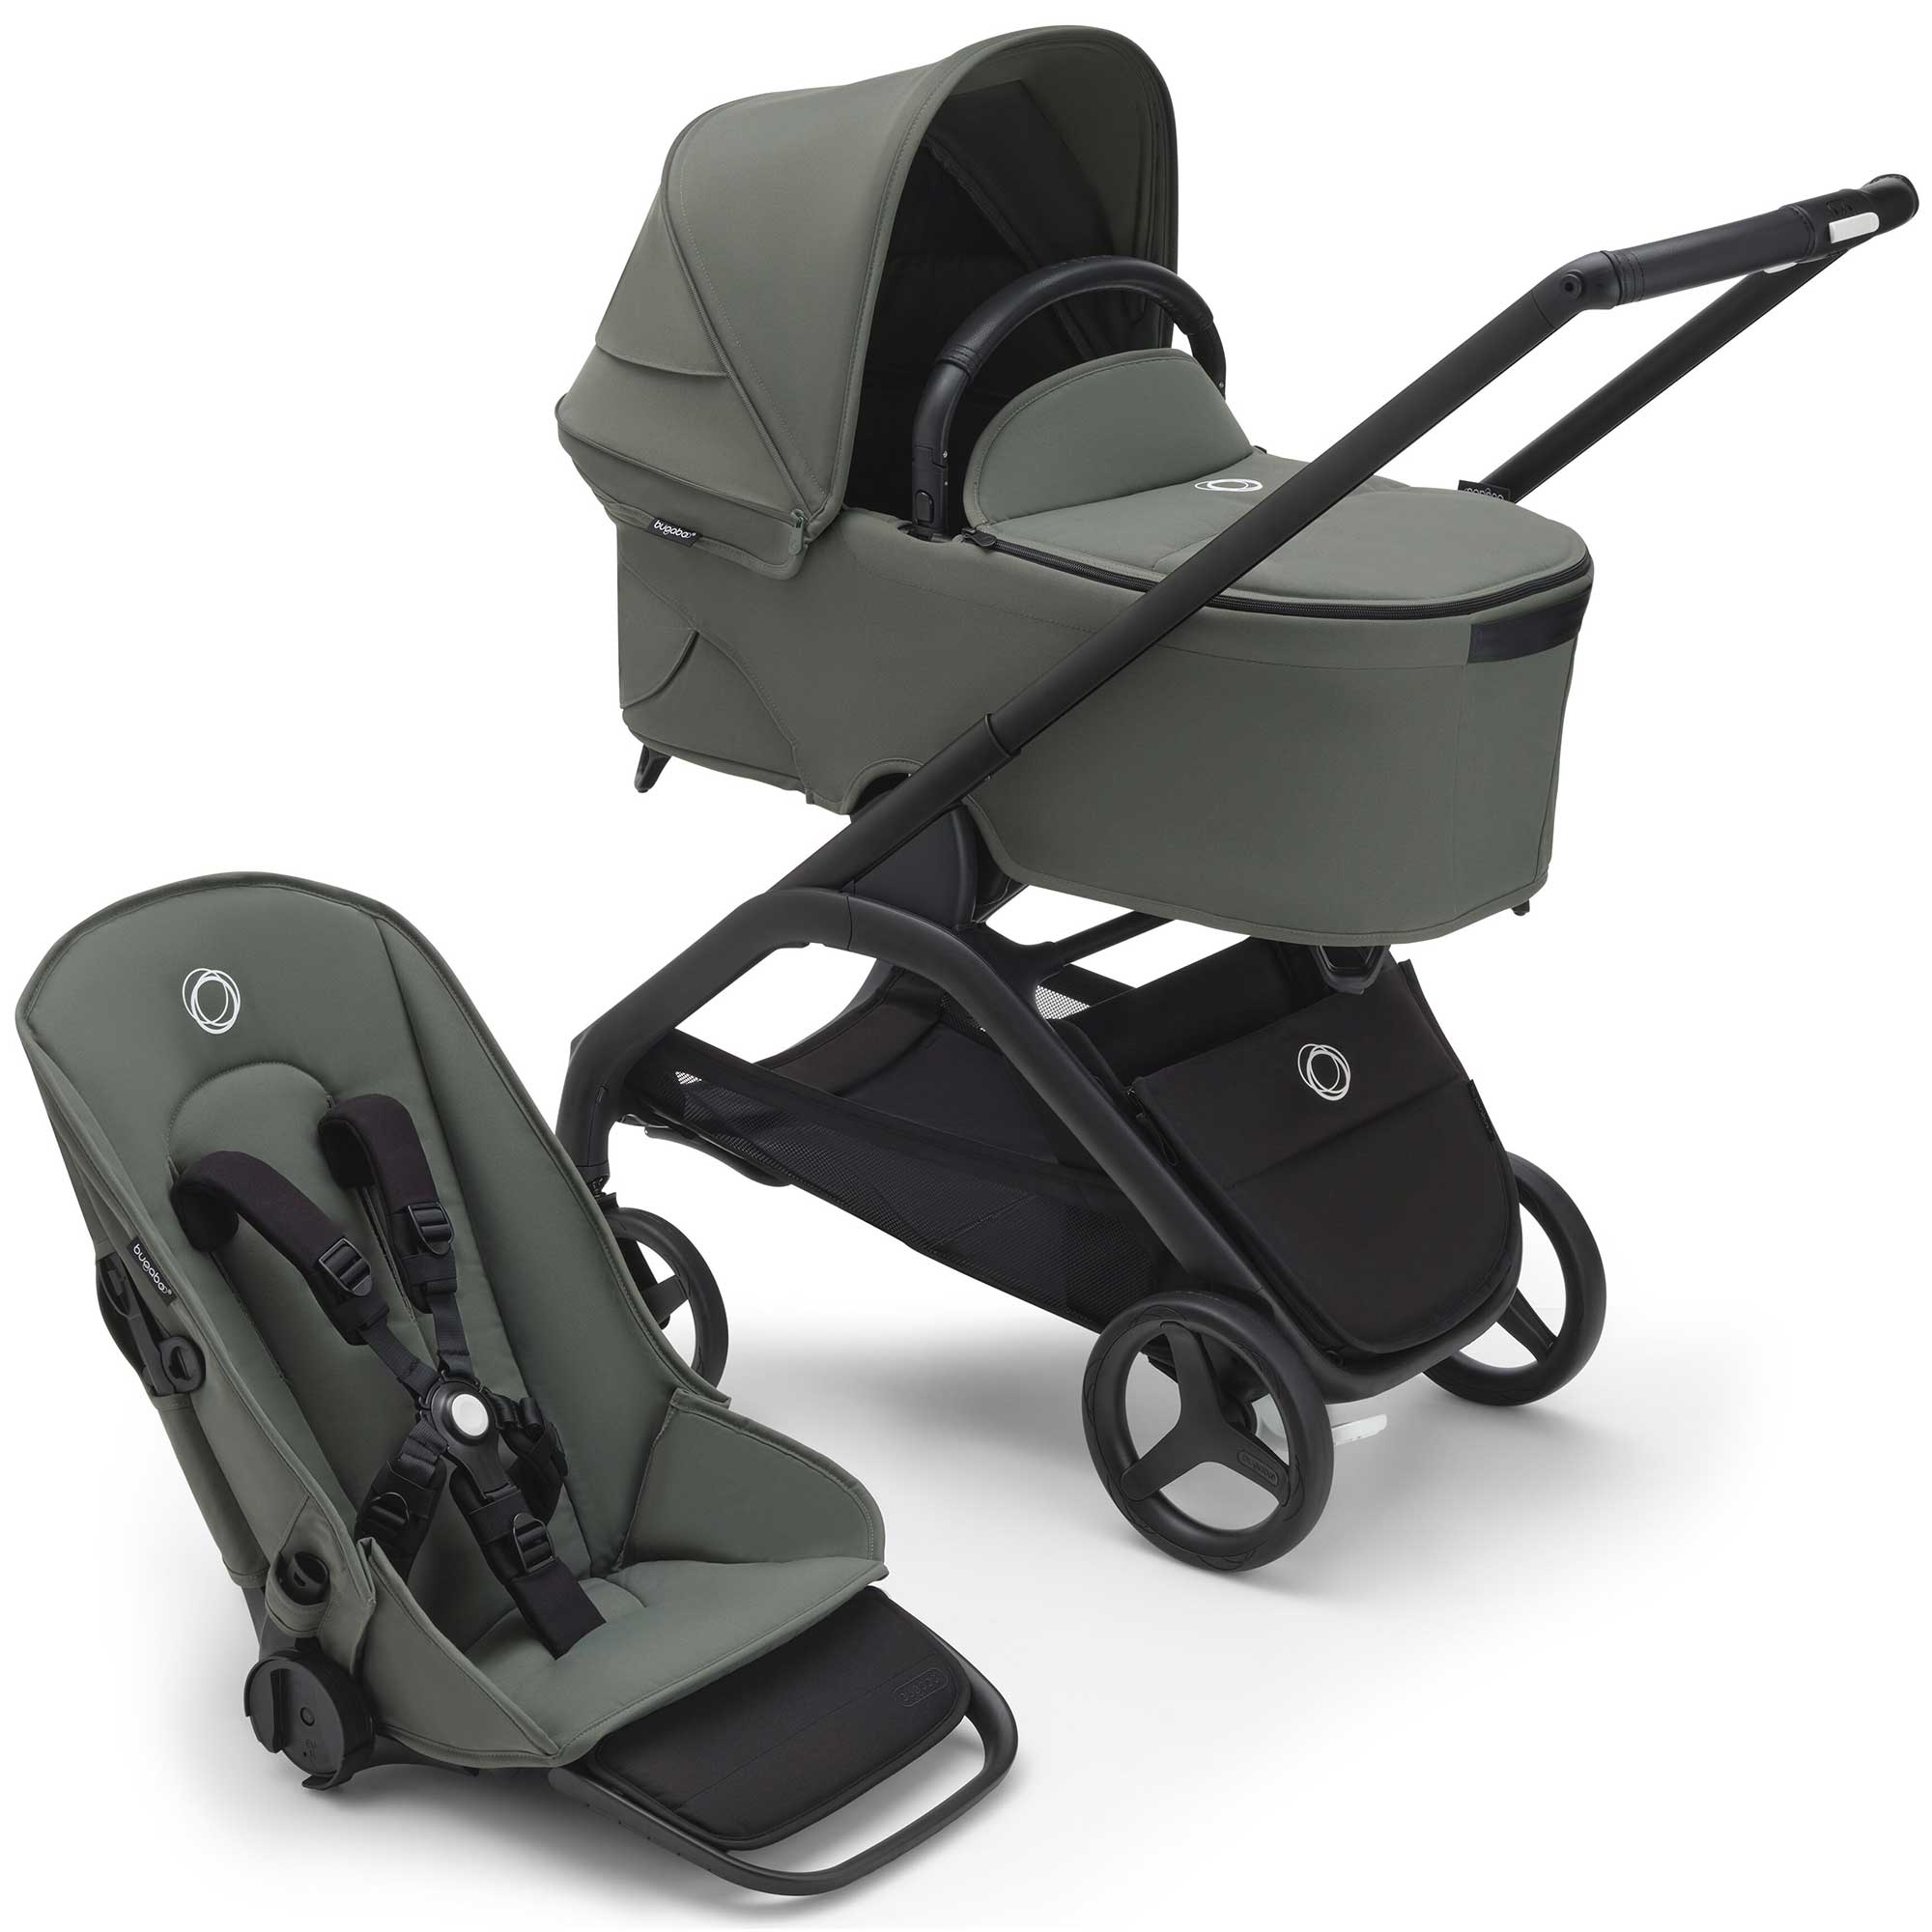 Bugaboo Travel Systems Bugaboo Dragonfly Ultimate Bundle in Black/Forest Green 13810-BLK-FOR-GRN